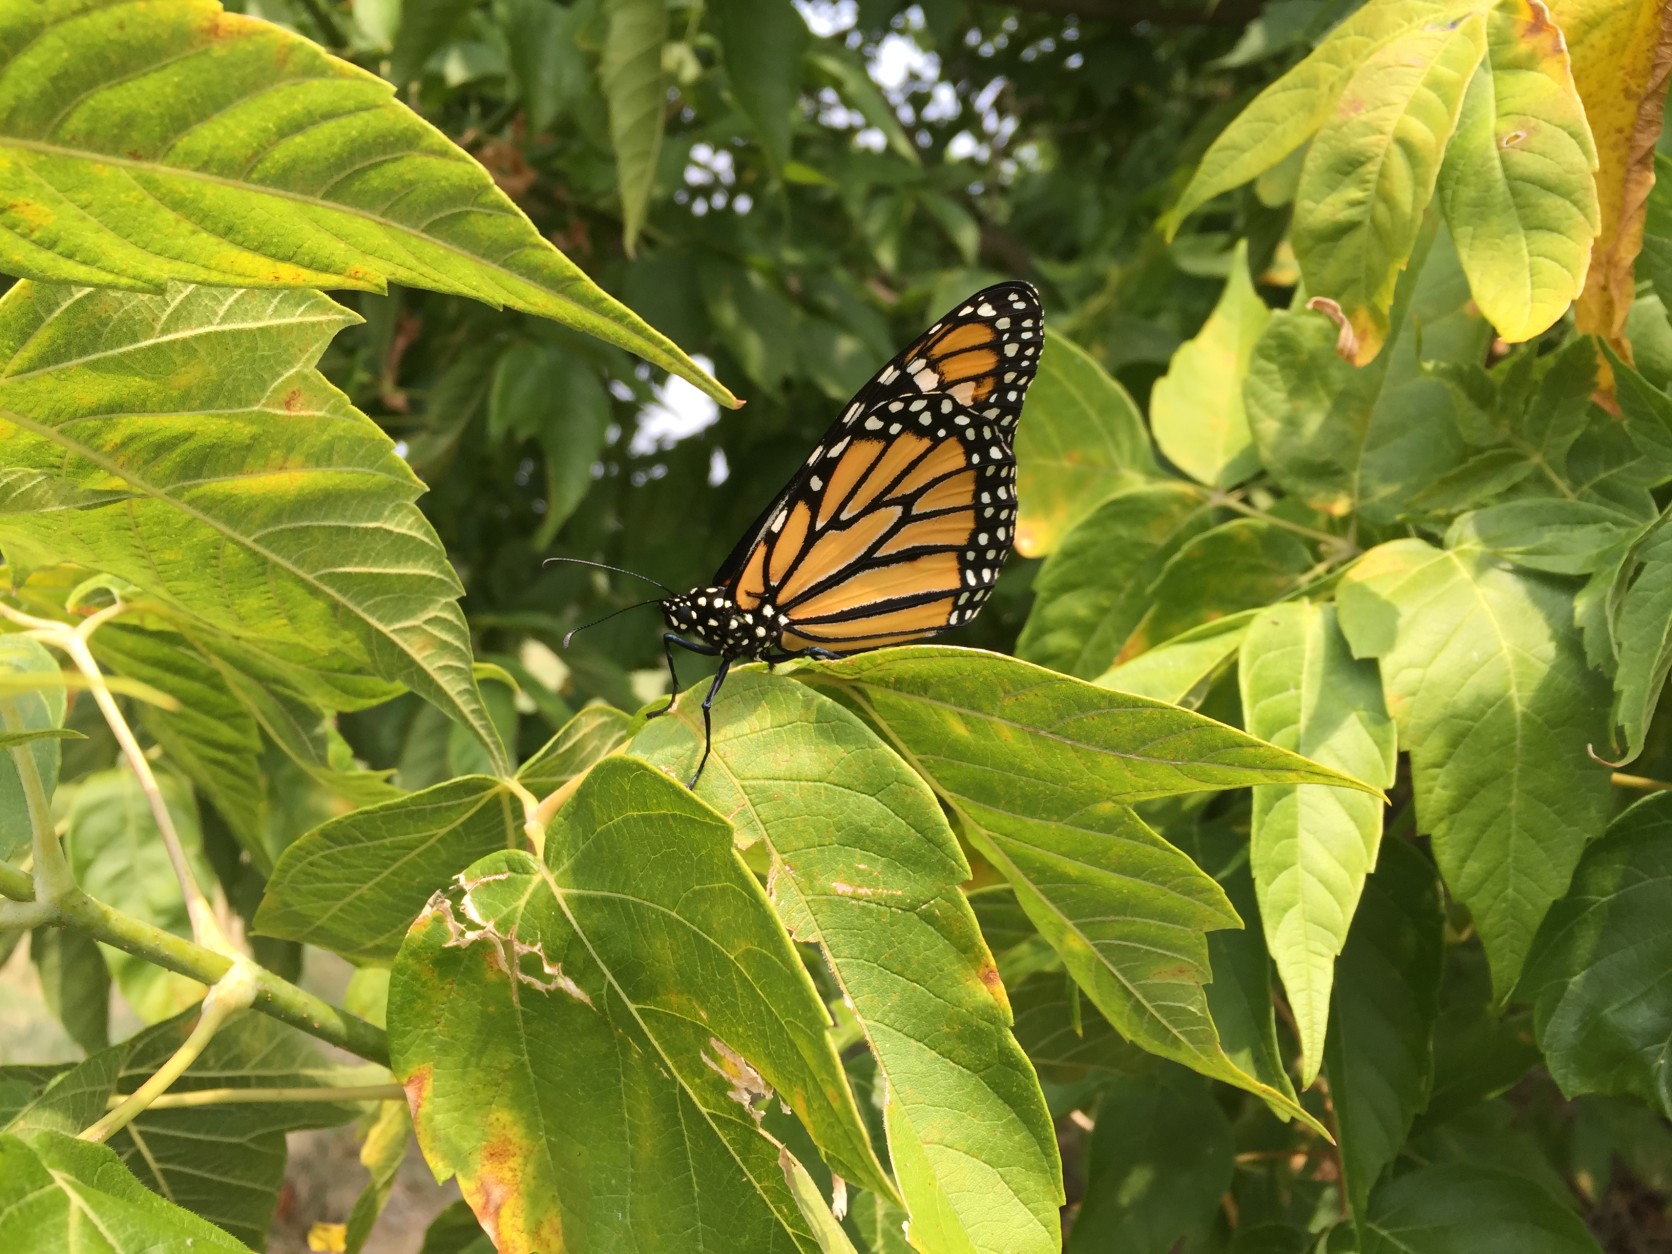 Monarch butterflies like this one are in serious decline, but you can help them by planting milkweed in your yard. It's the only plant monarch caterpillars eat. (WTOP/Michelle Basch)